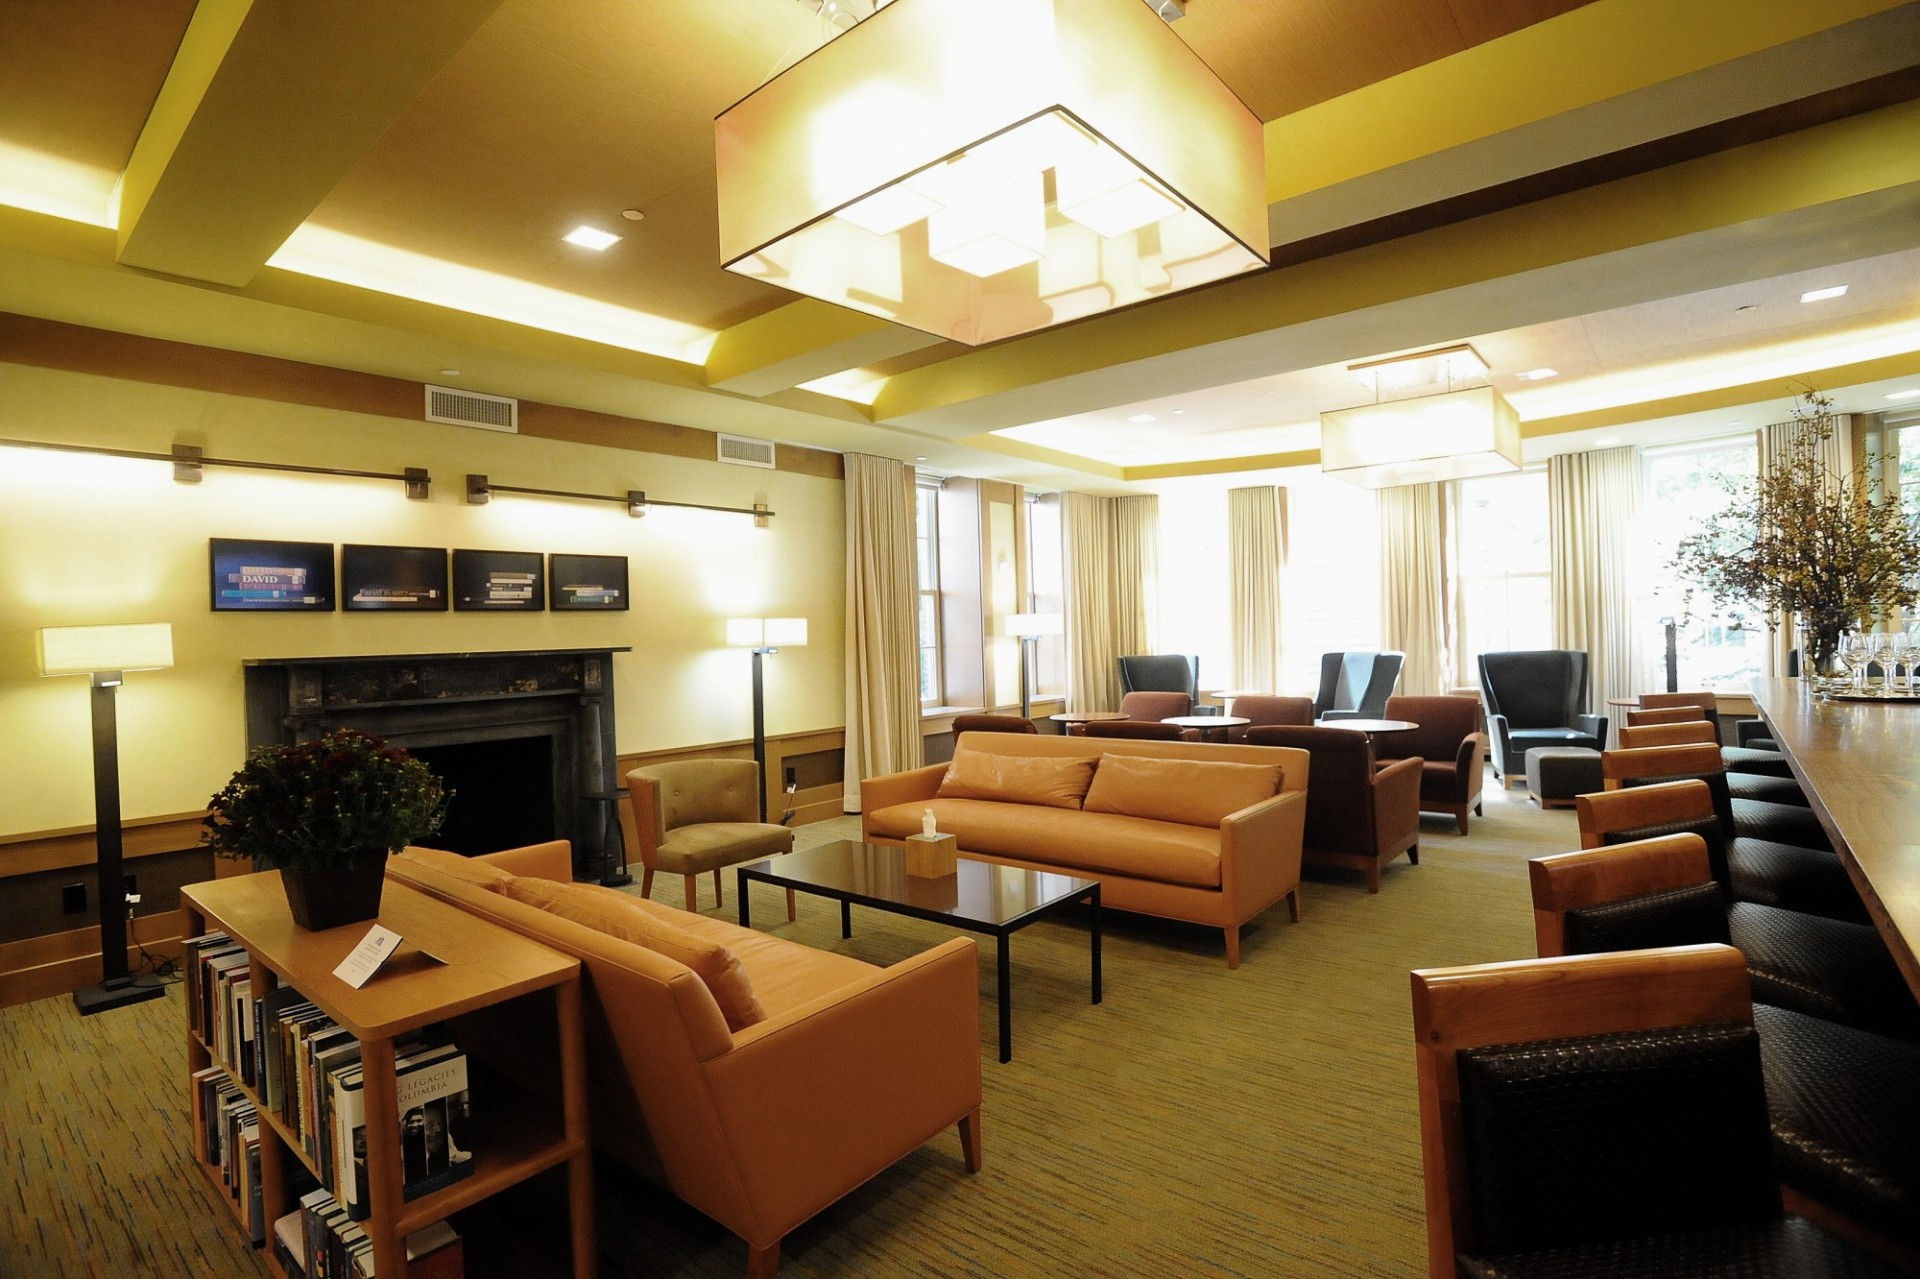 A lounge with neutral colored couches and lounge chairs. The walls are painted white and sunlight streams through windows.